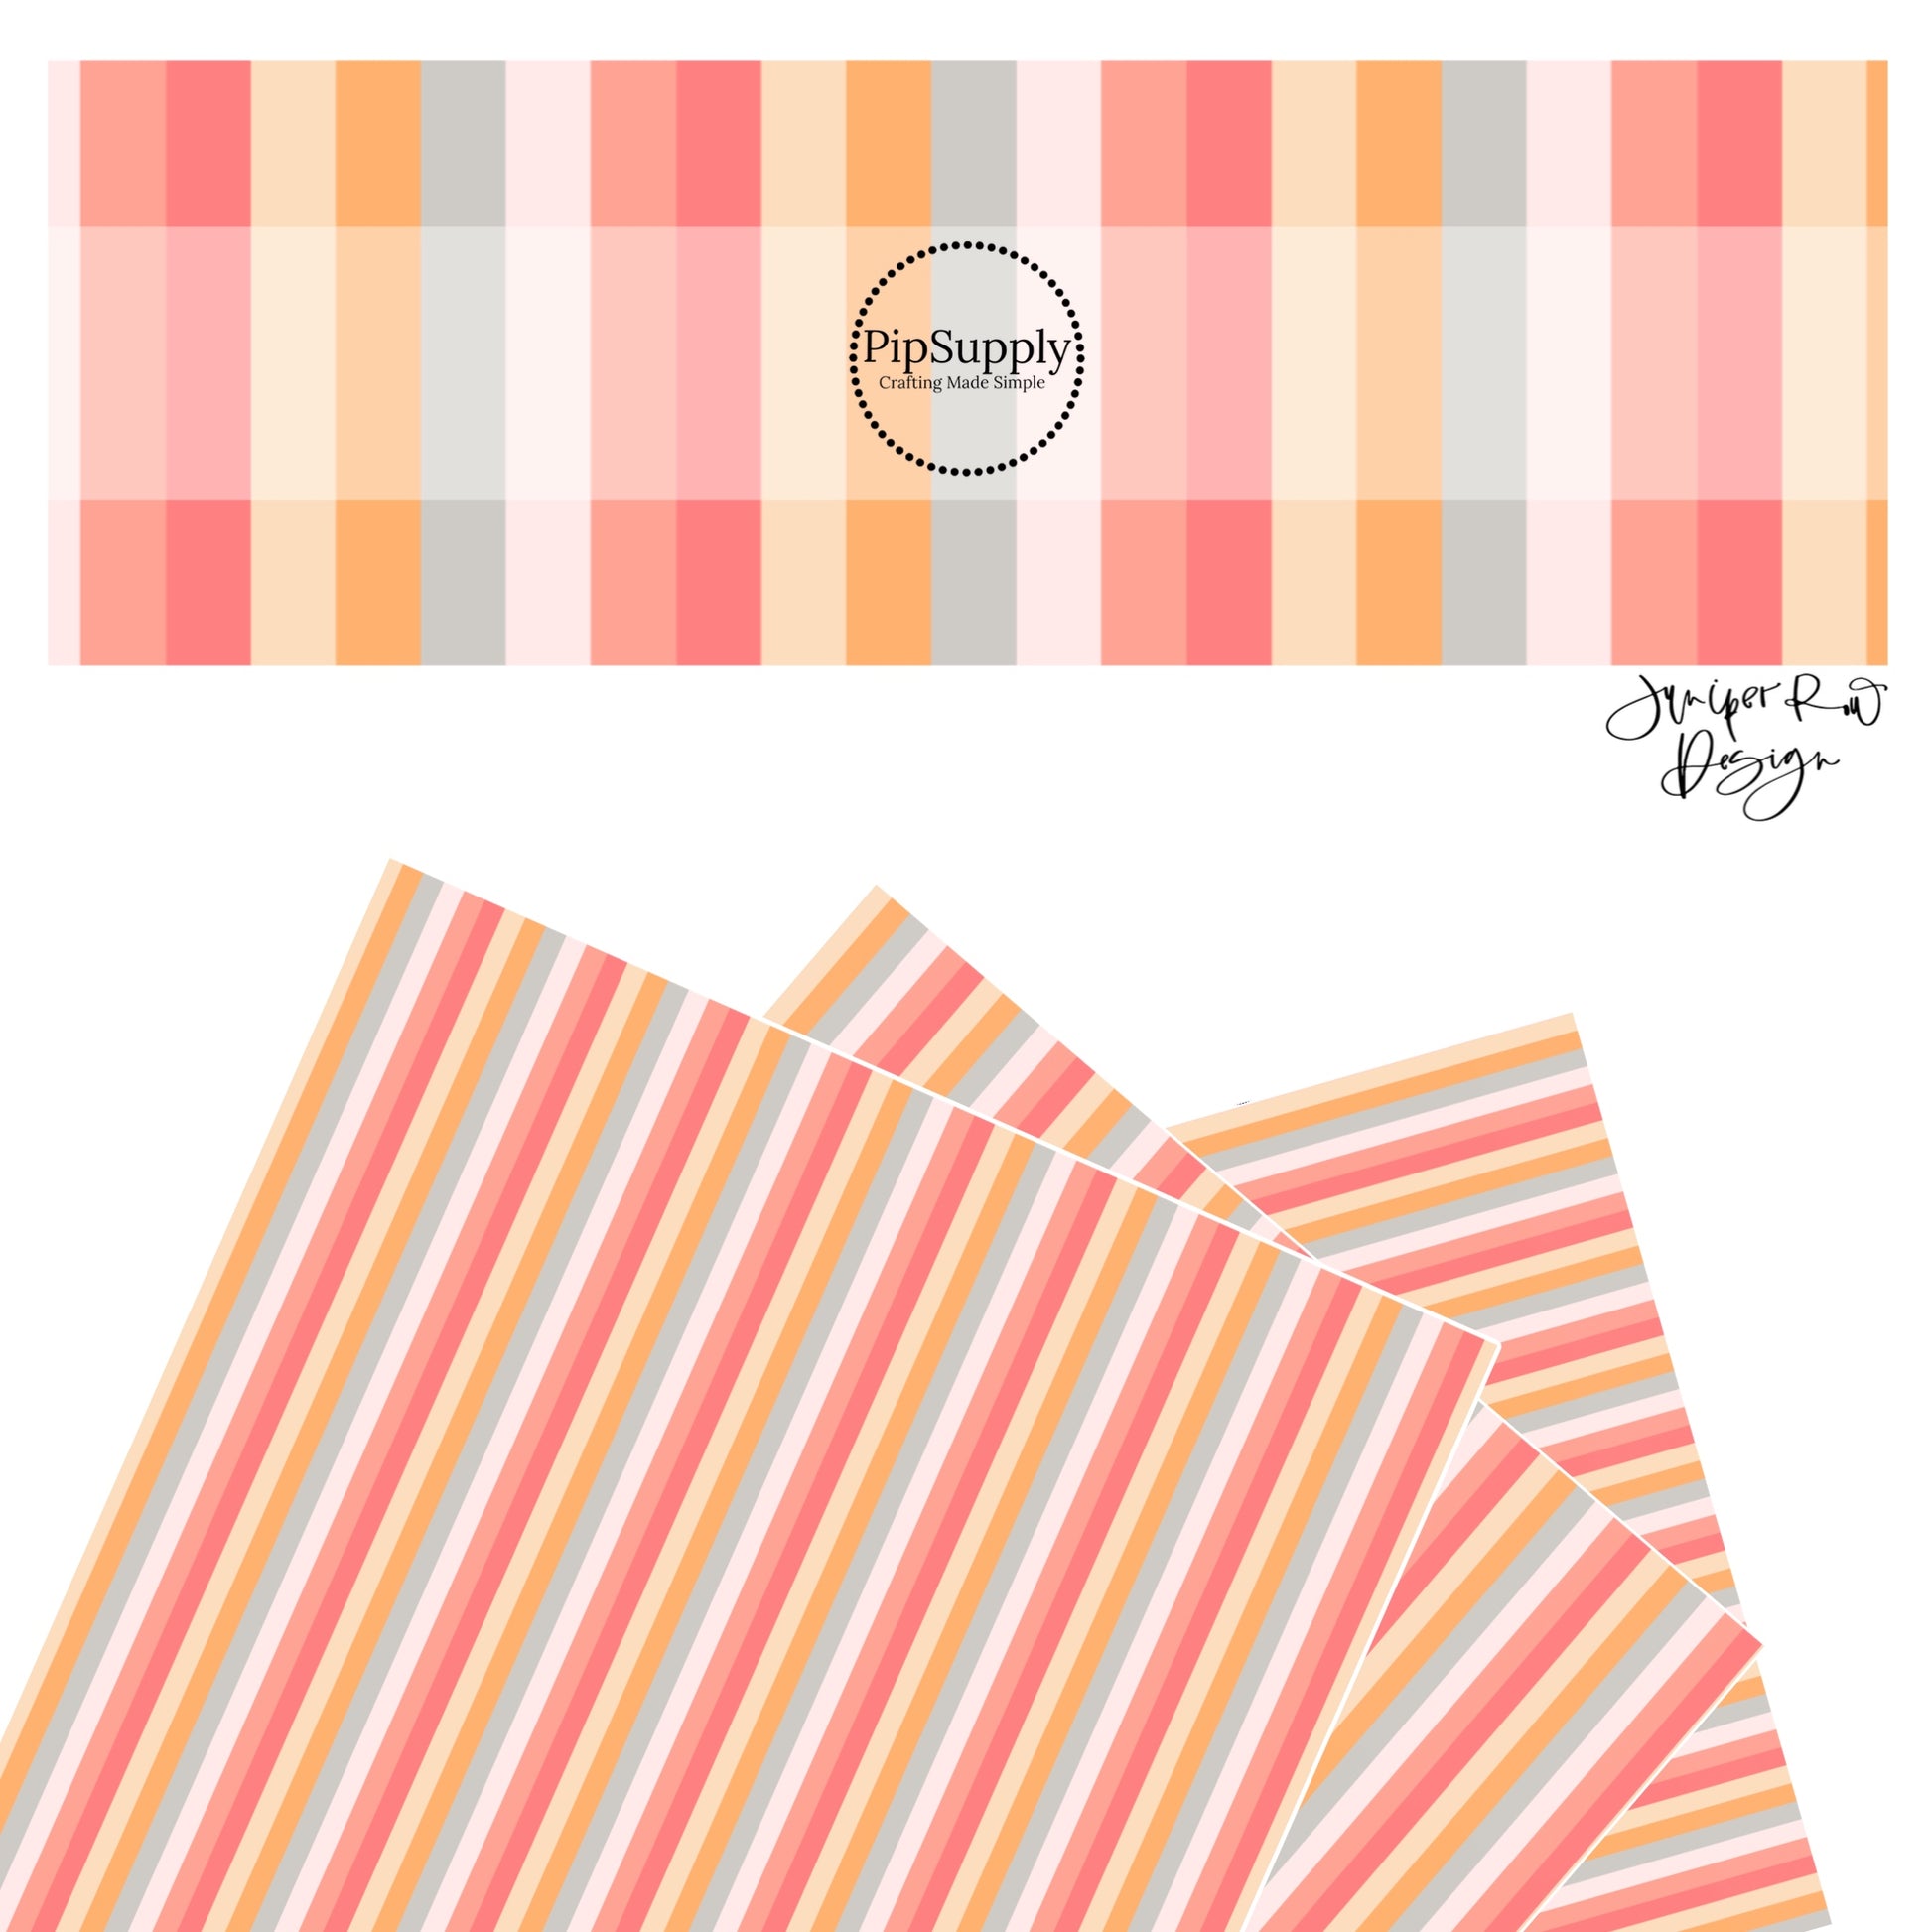 These Valentine's pattern themed faux leather sheets contain the following design elements: peach, pink, orange, yellow, and light gray stripes. Our CPSIA compliant faux leather sheets or rolls can be used for all types of crafting projects.